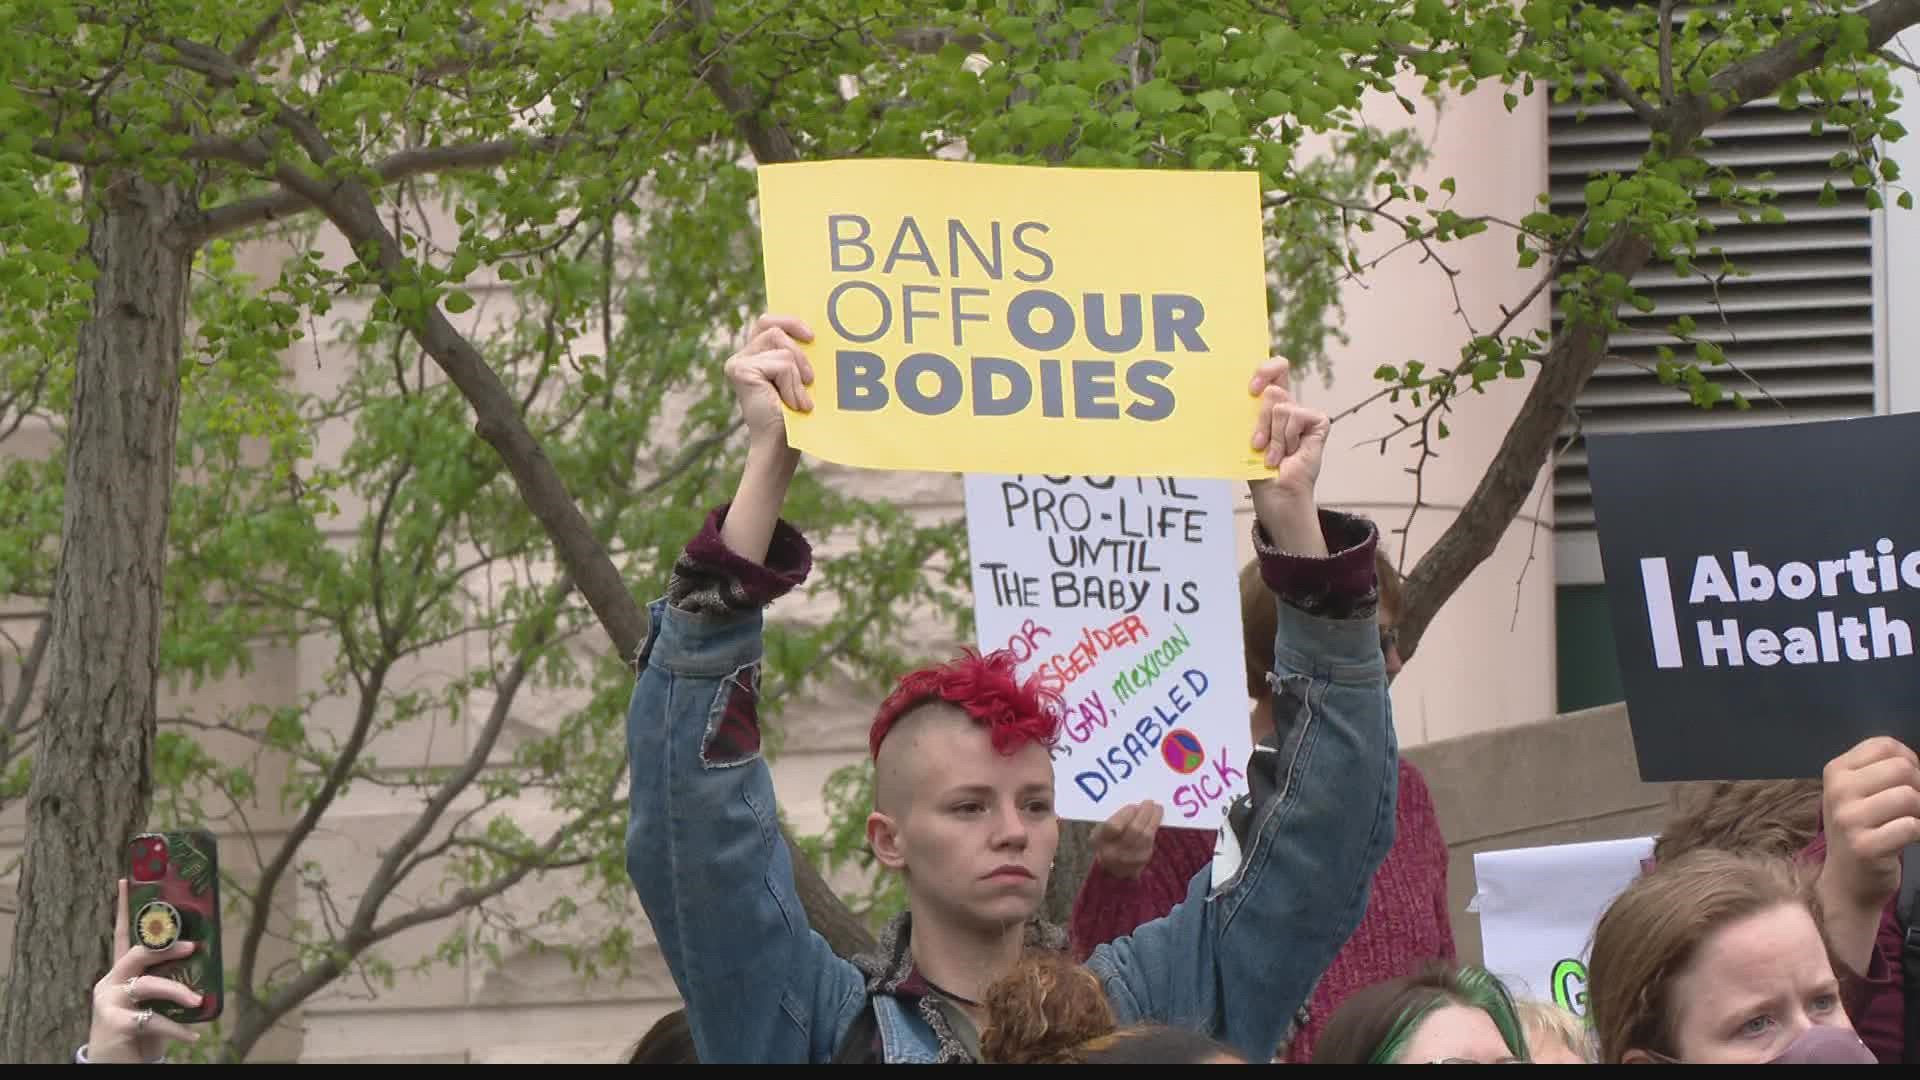 Hundreds of people rallied in favor of abortion rights outside the federal courthouse downtown. Opponents of abortion rights have remained quiet on the issue.